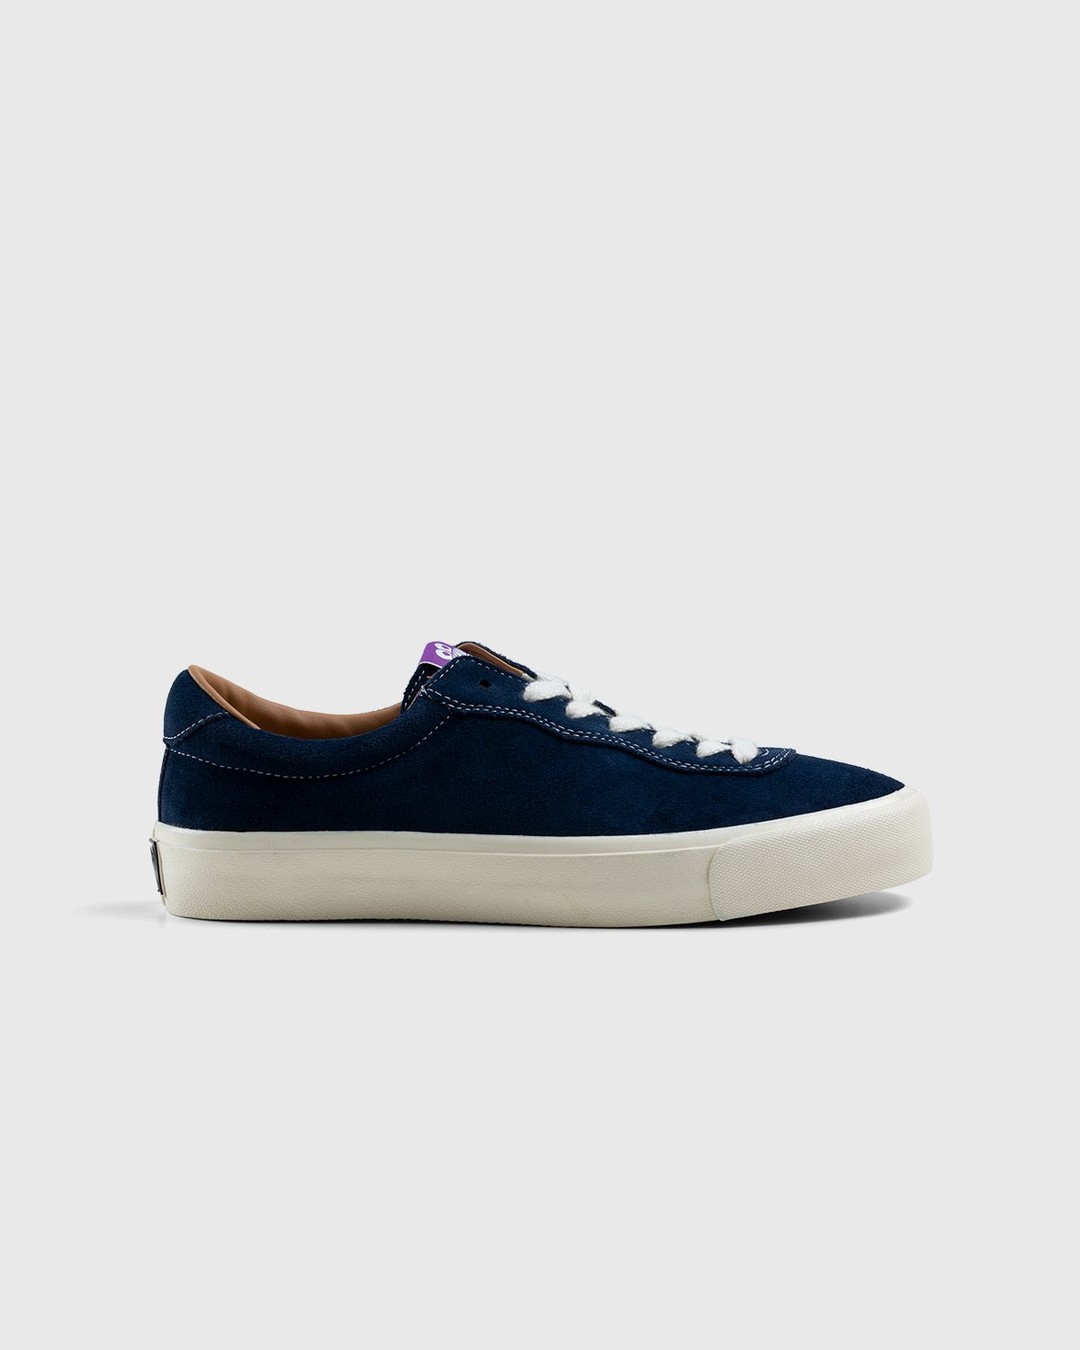 Last Resort AB – VM001 Lo Suede Old Blue/White - Sneakers - Blue - Image 1